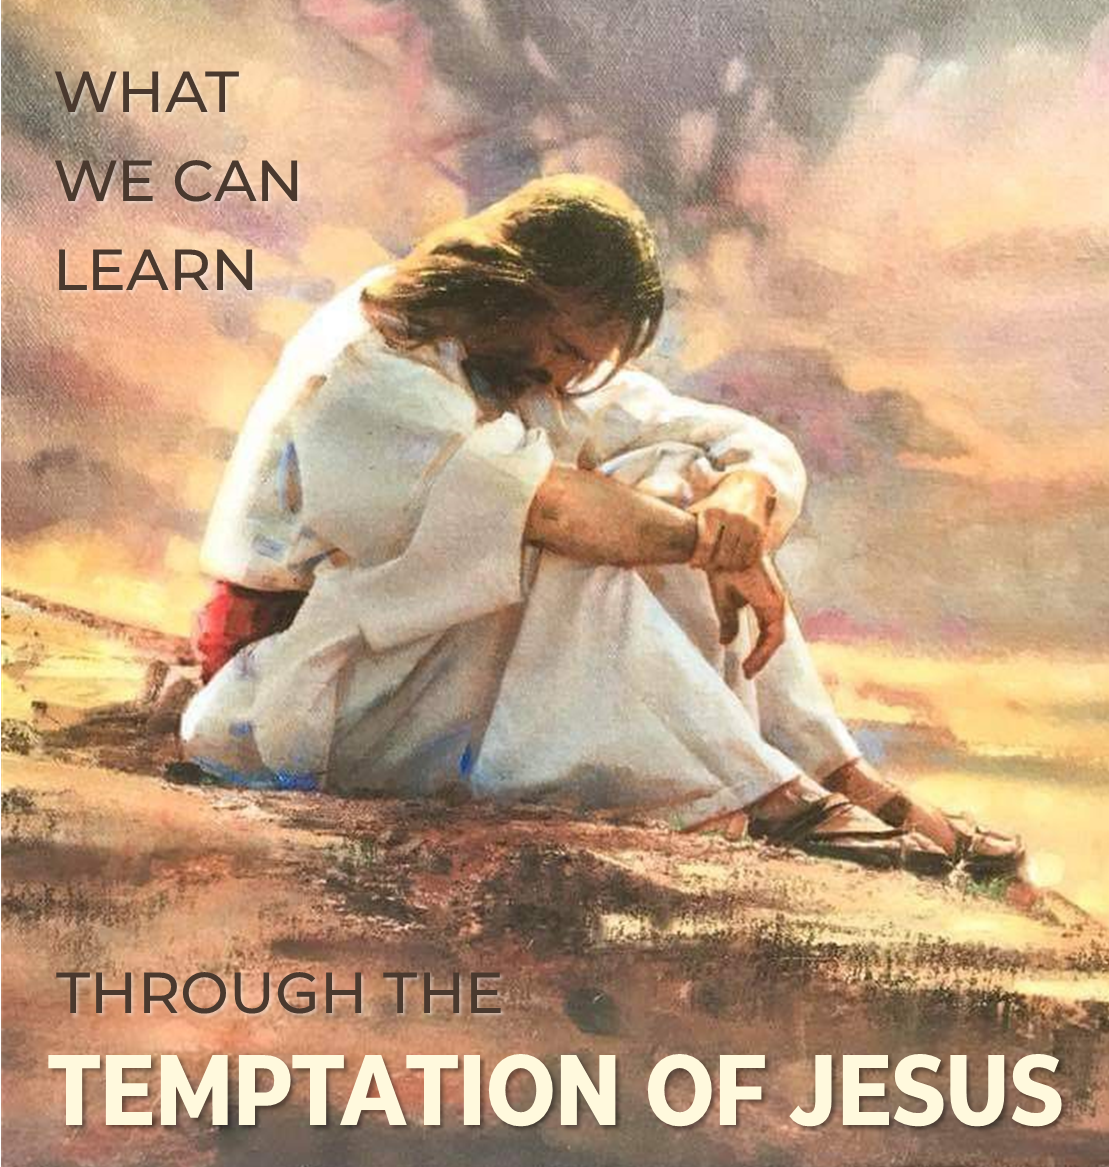 Jesus, Our Ultimate Example